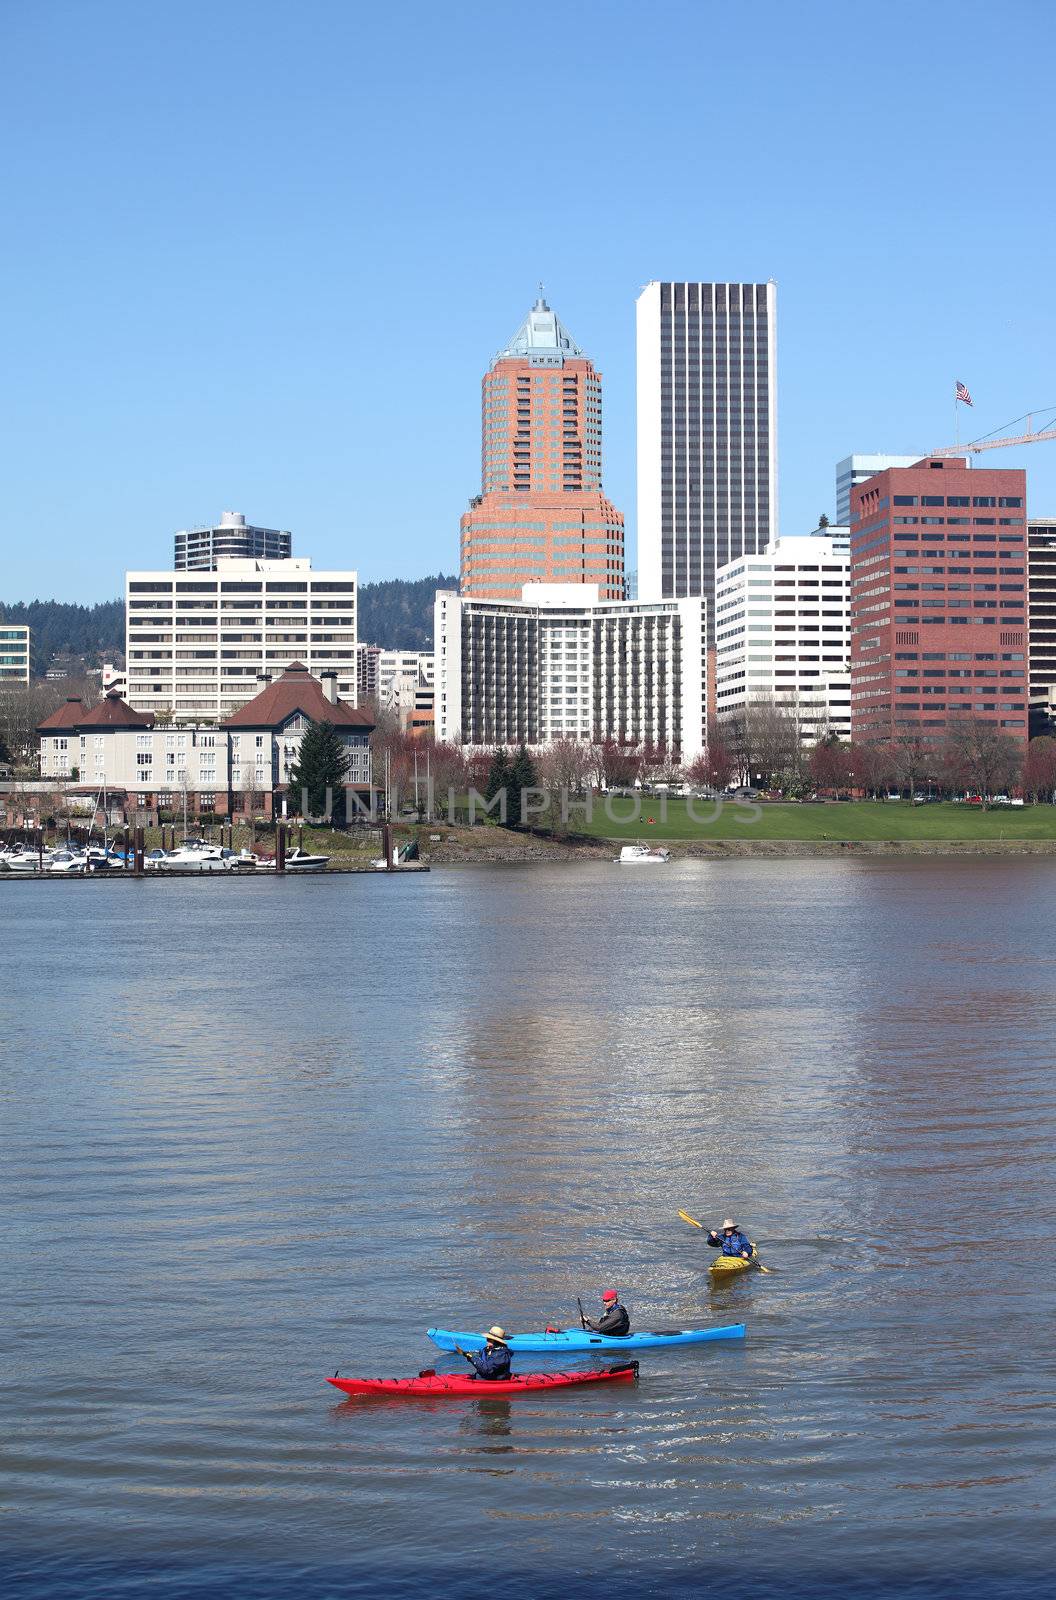 Three kayaks on the Willamette river enjoying the spring weather with the city on the background.